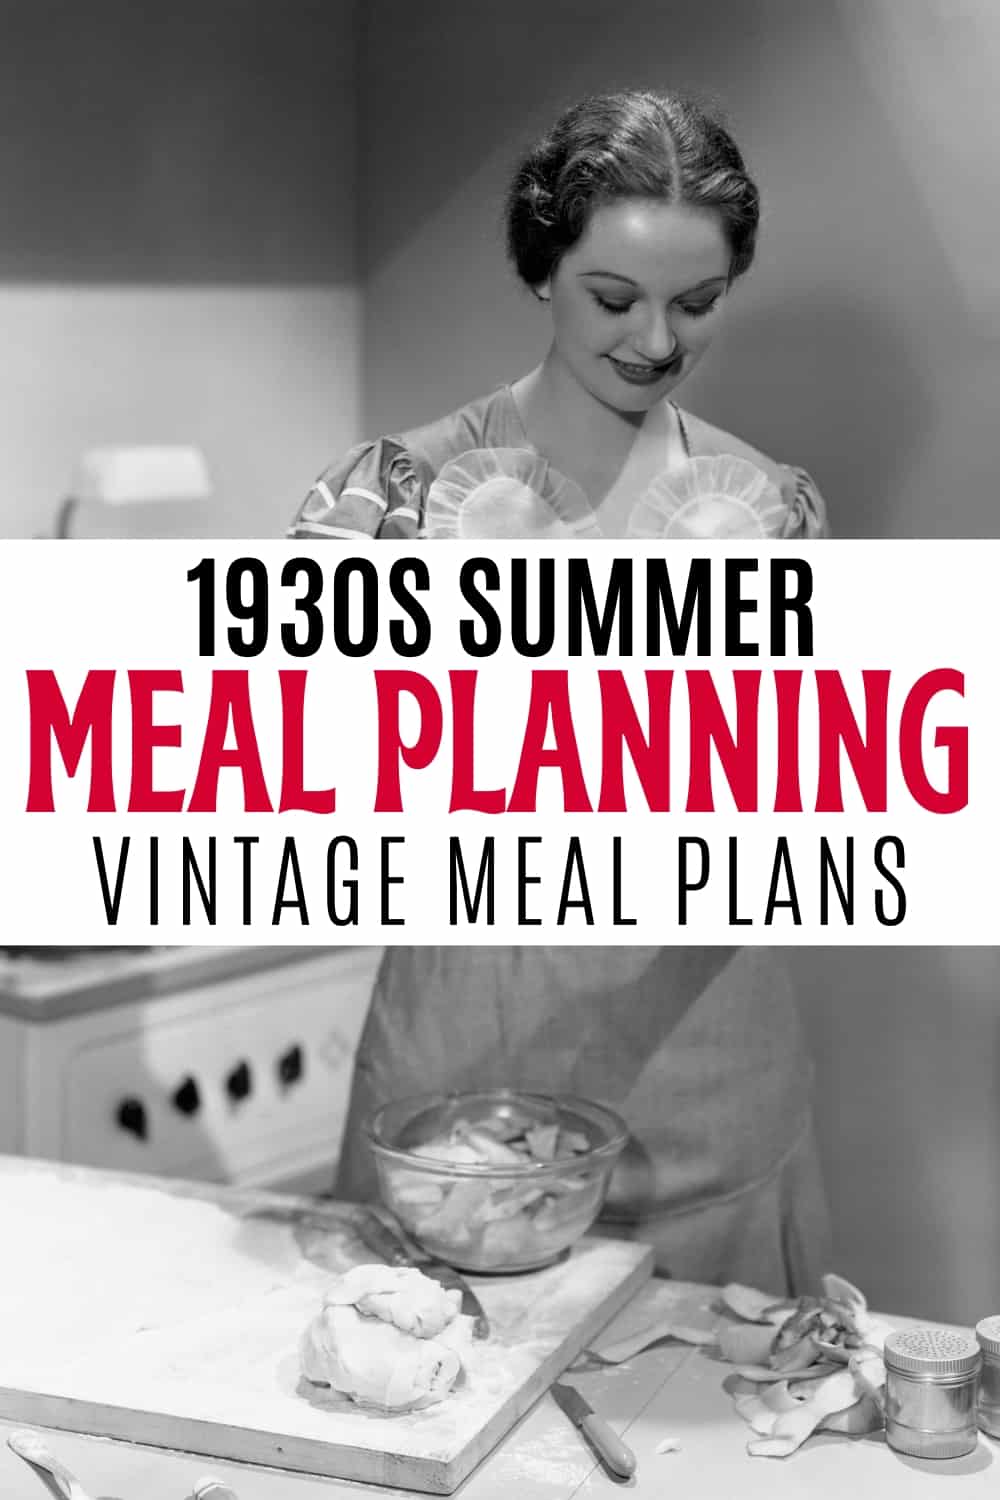 black and white photo of 1930s housewife in kitchen prepping food with text overlay 1930s summer meal planning vintage meal plans